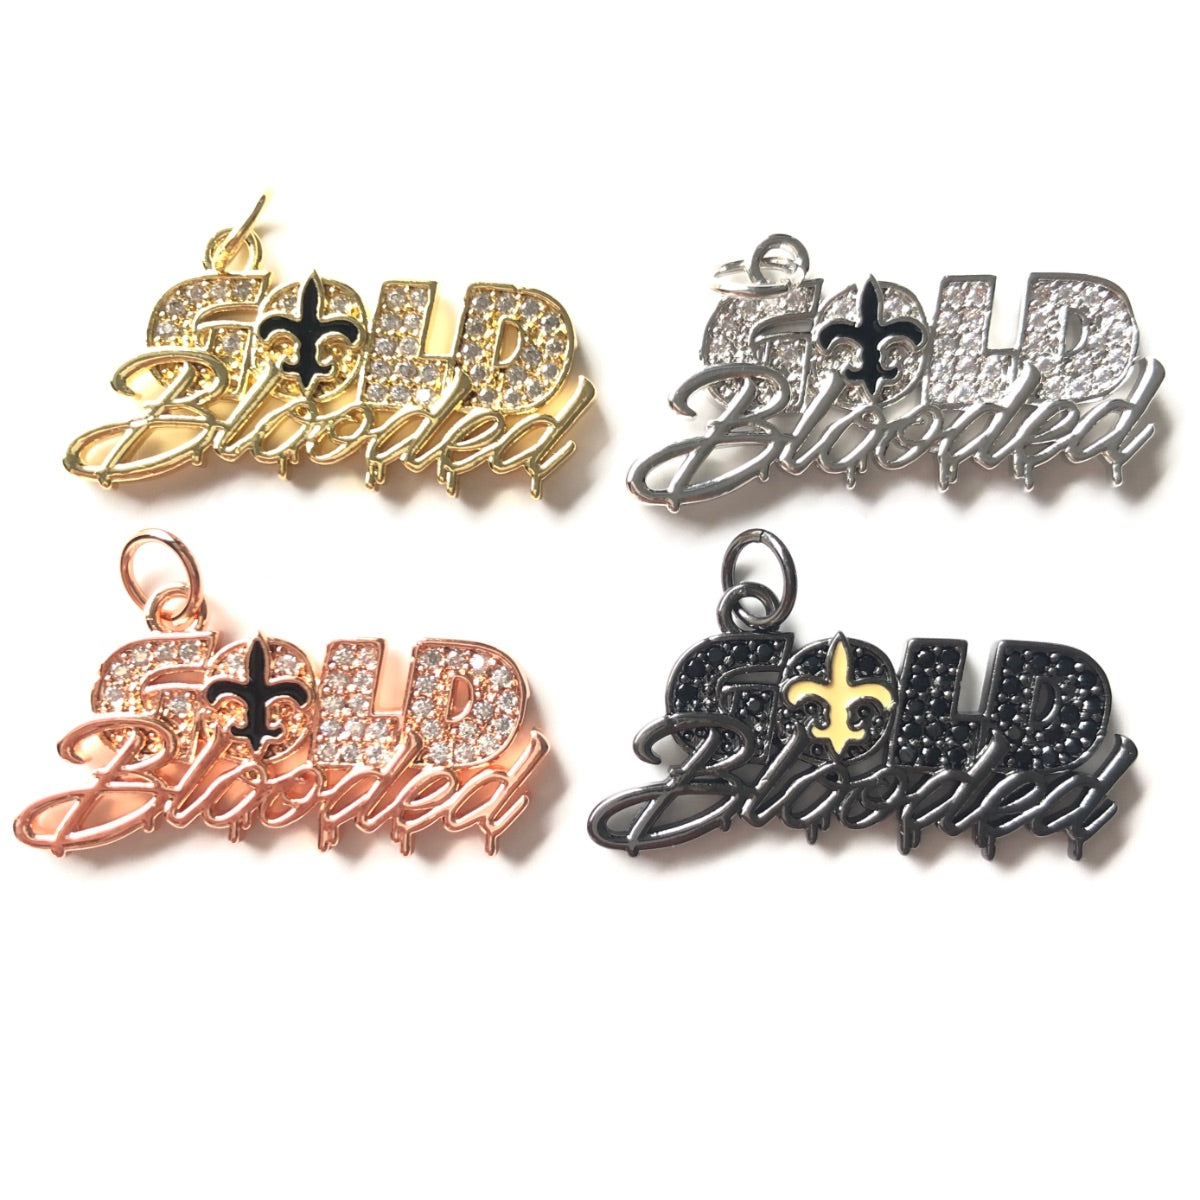 10pcs/lot 33*16.5mm Fleur De Lis CZ Saints Gold Blooded Word Charms CZ Paved Charms American Football Sports Louisiana Inspired New Charms Arrivals Charms Beads Beyond